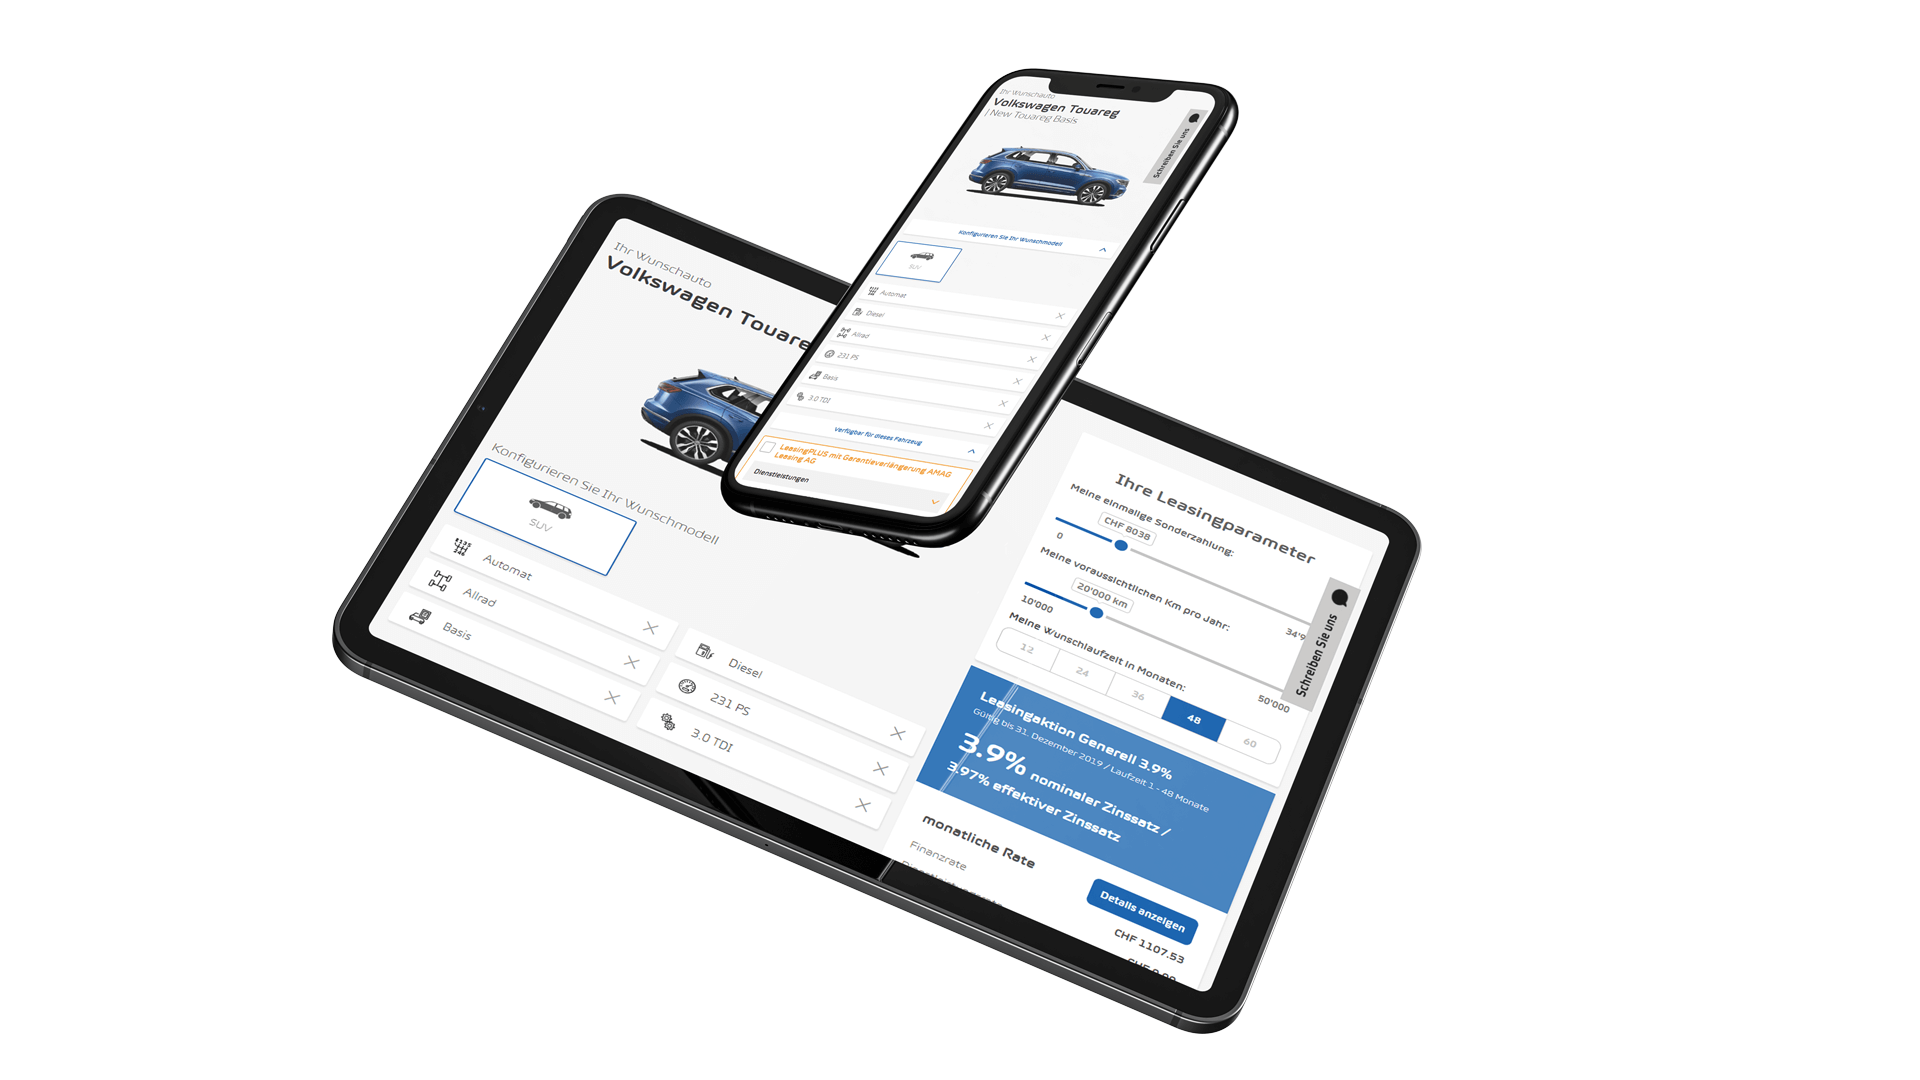 Leasing Portal on tablet and mobile phone